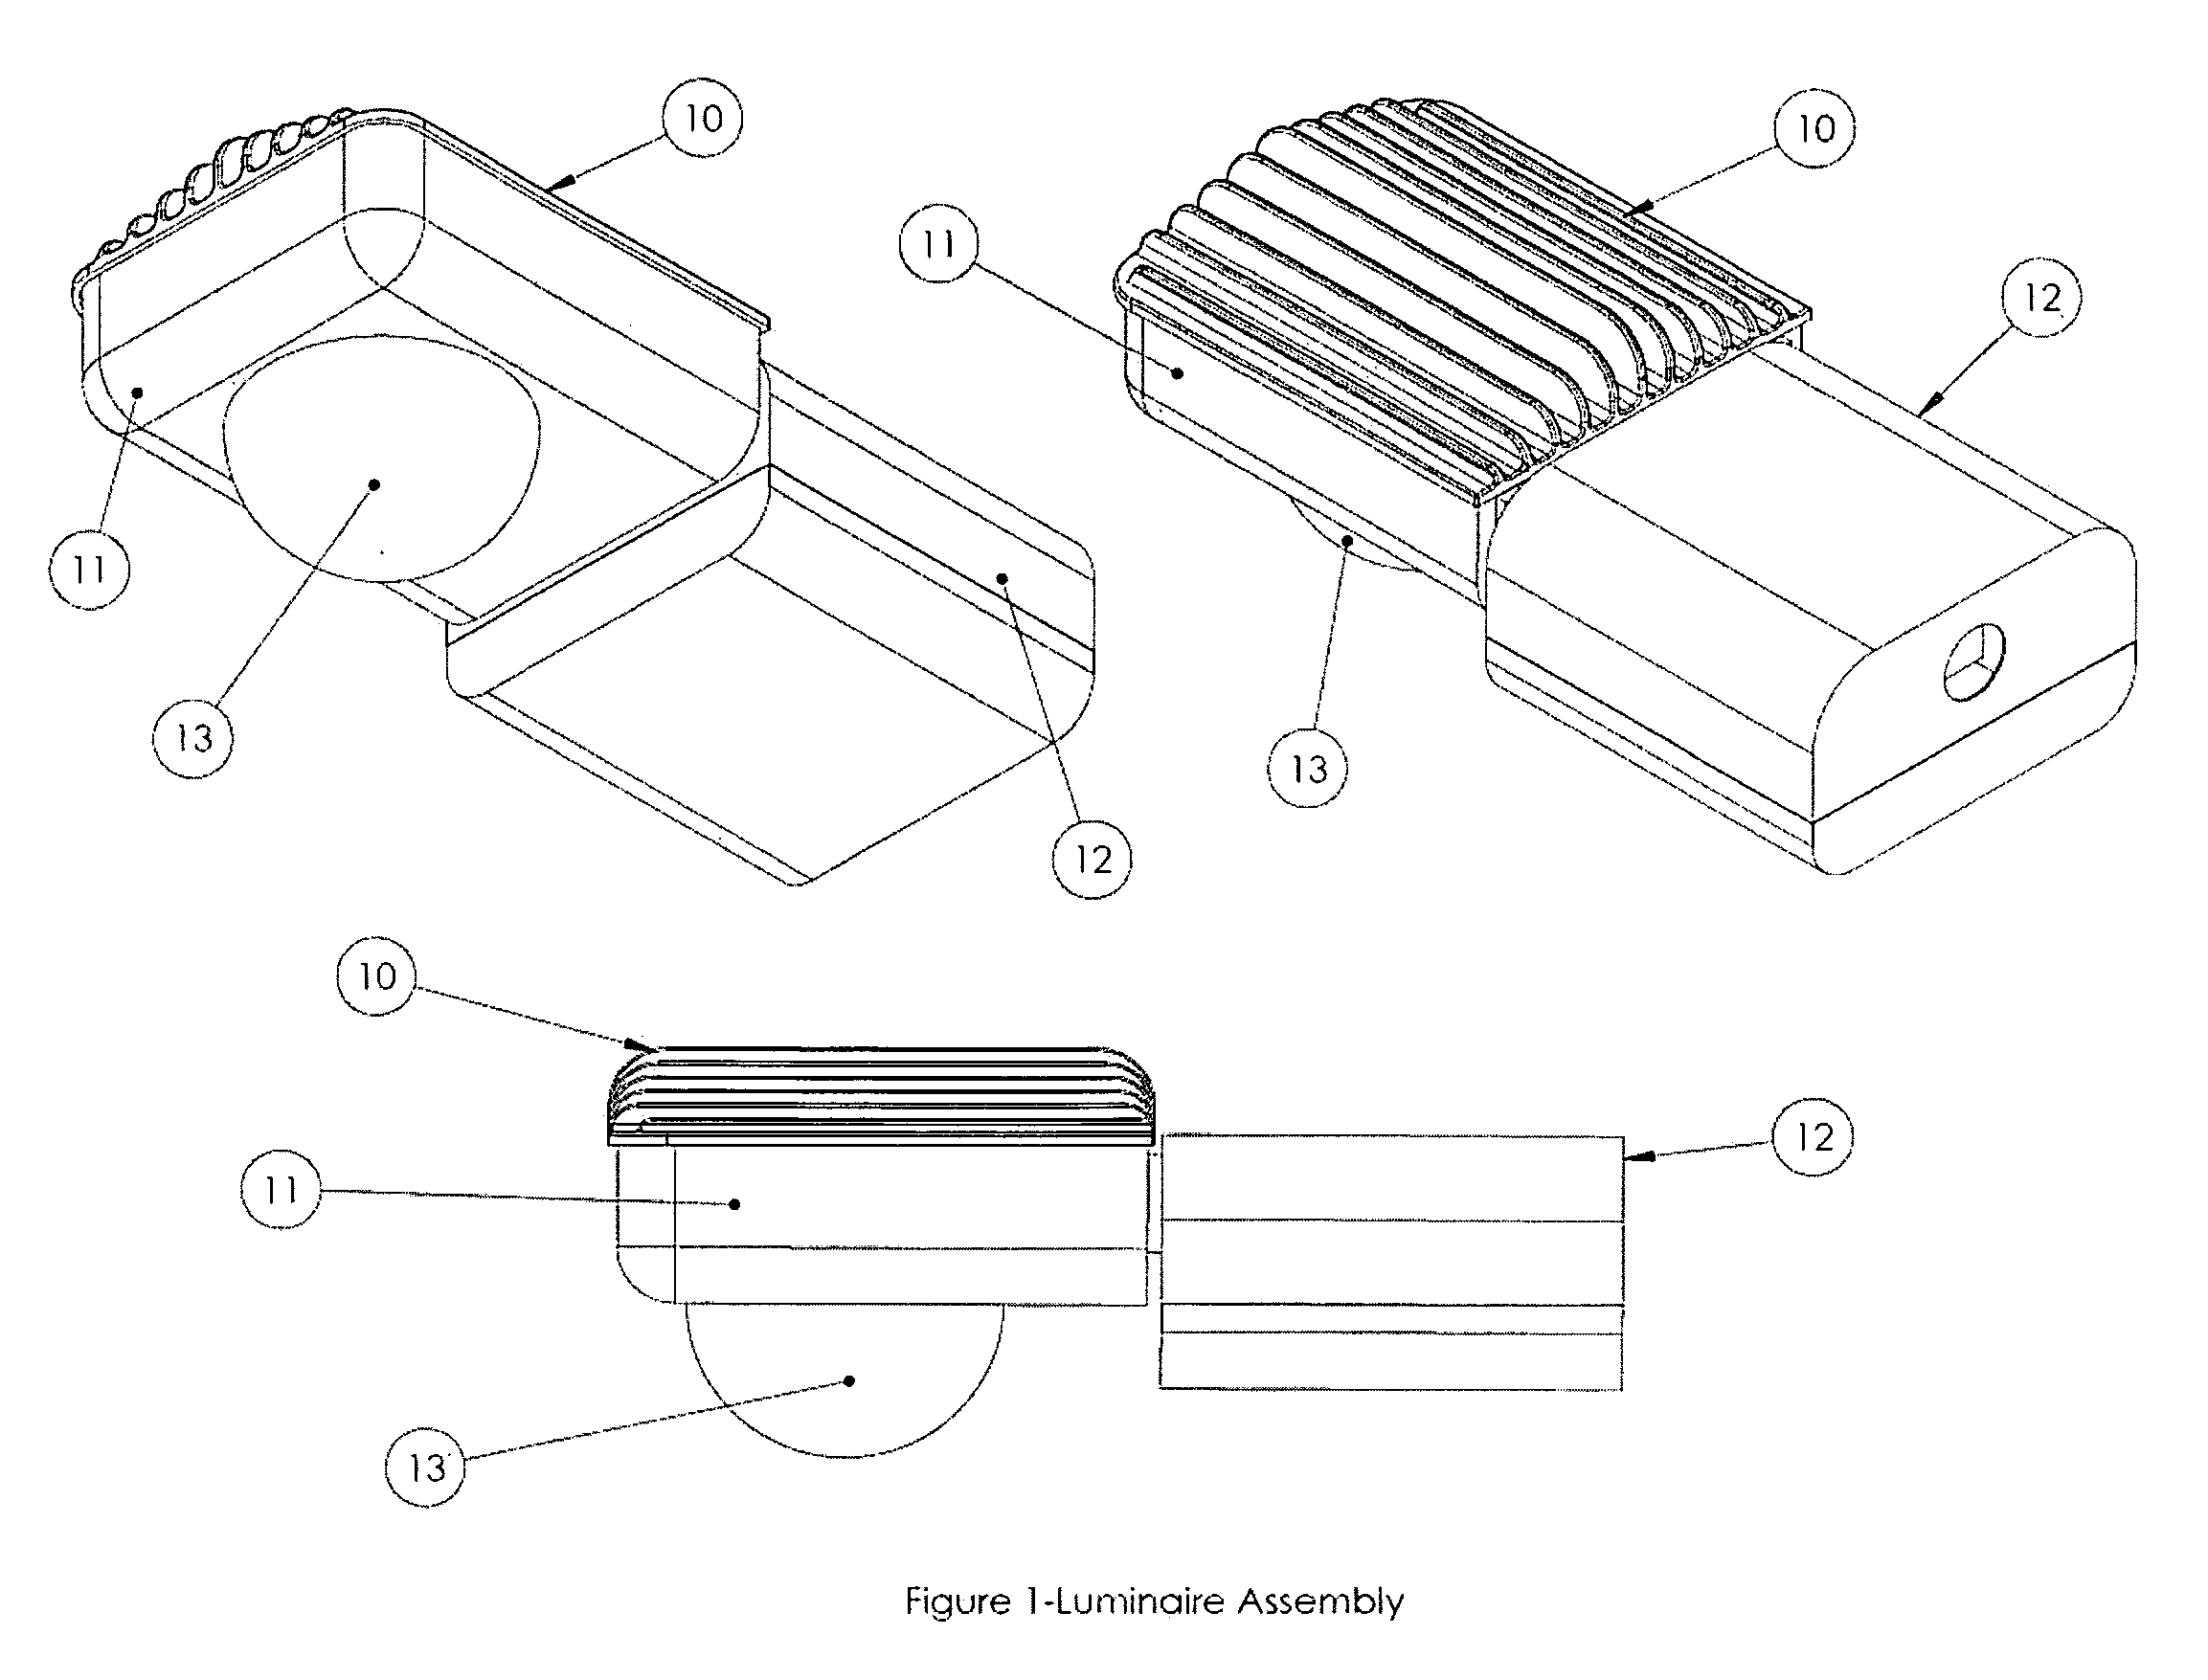 Outdoor luminaire using light emitting diodes